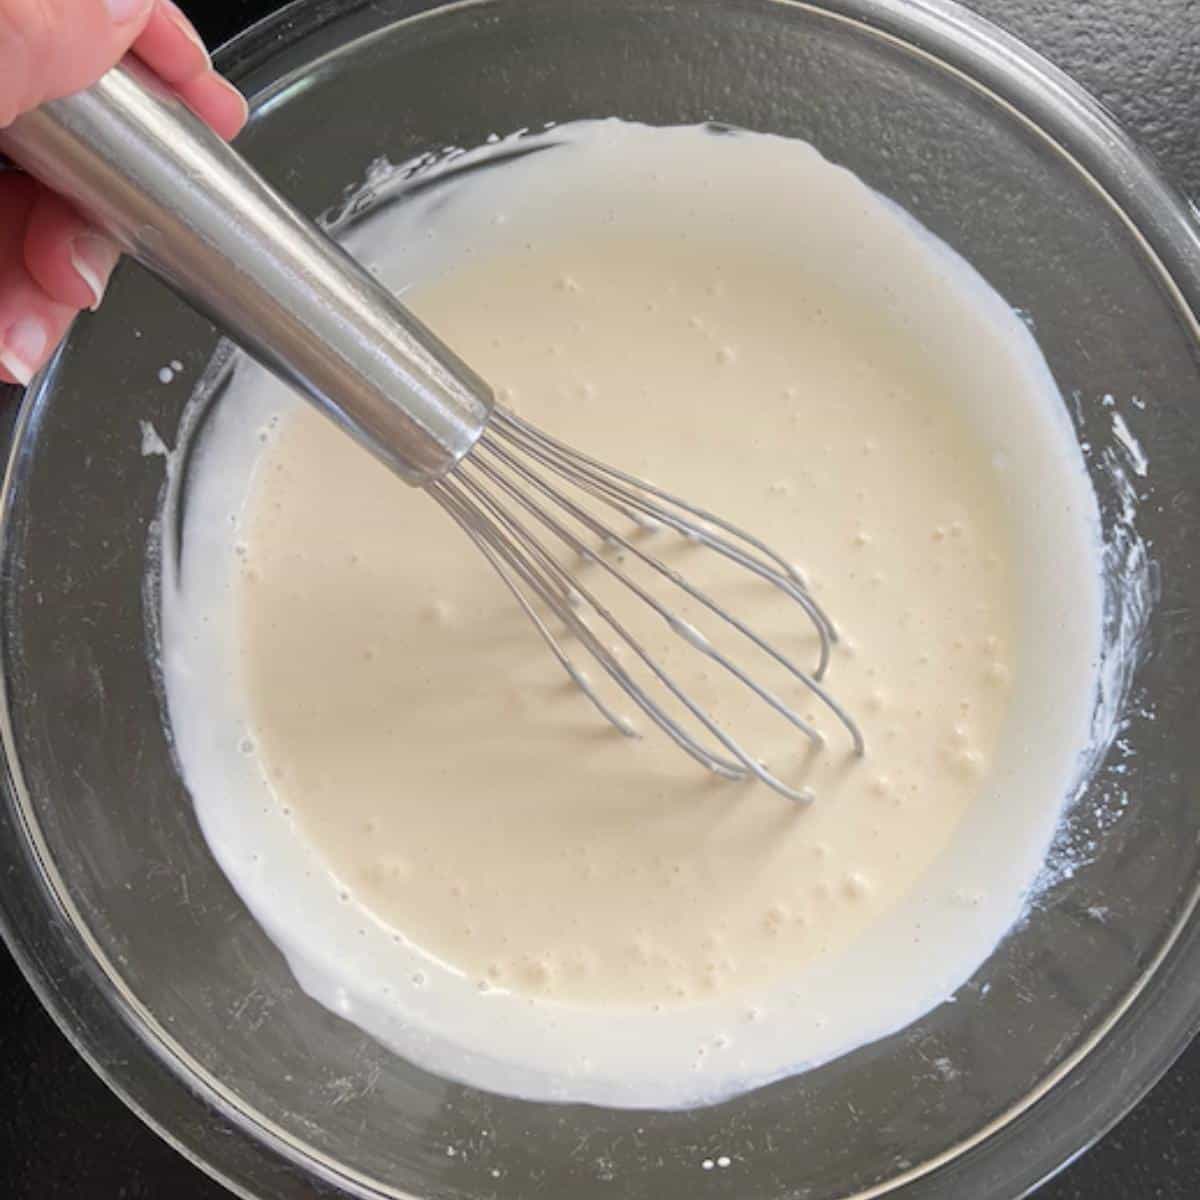 macaroni salad sauce with hand holding whisk